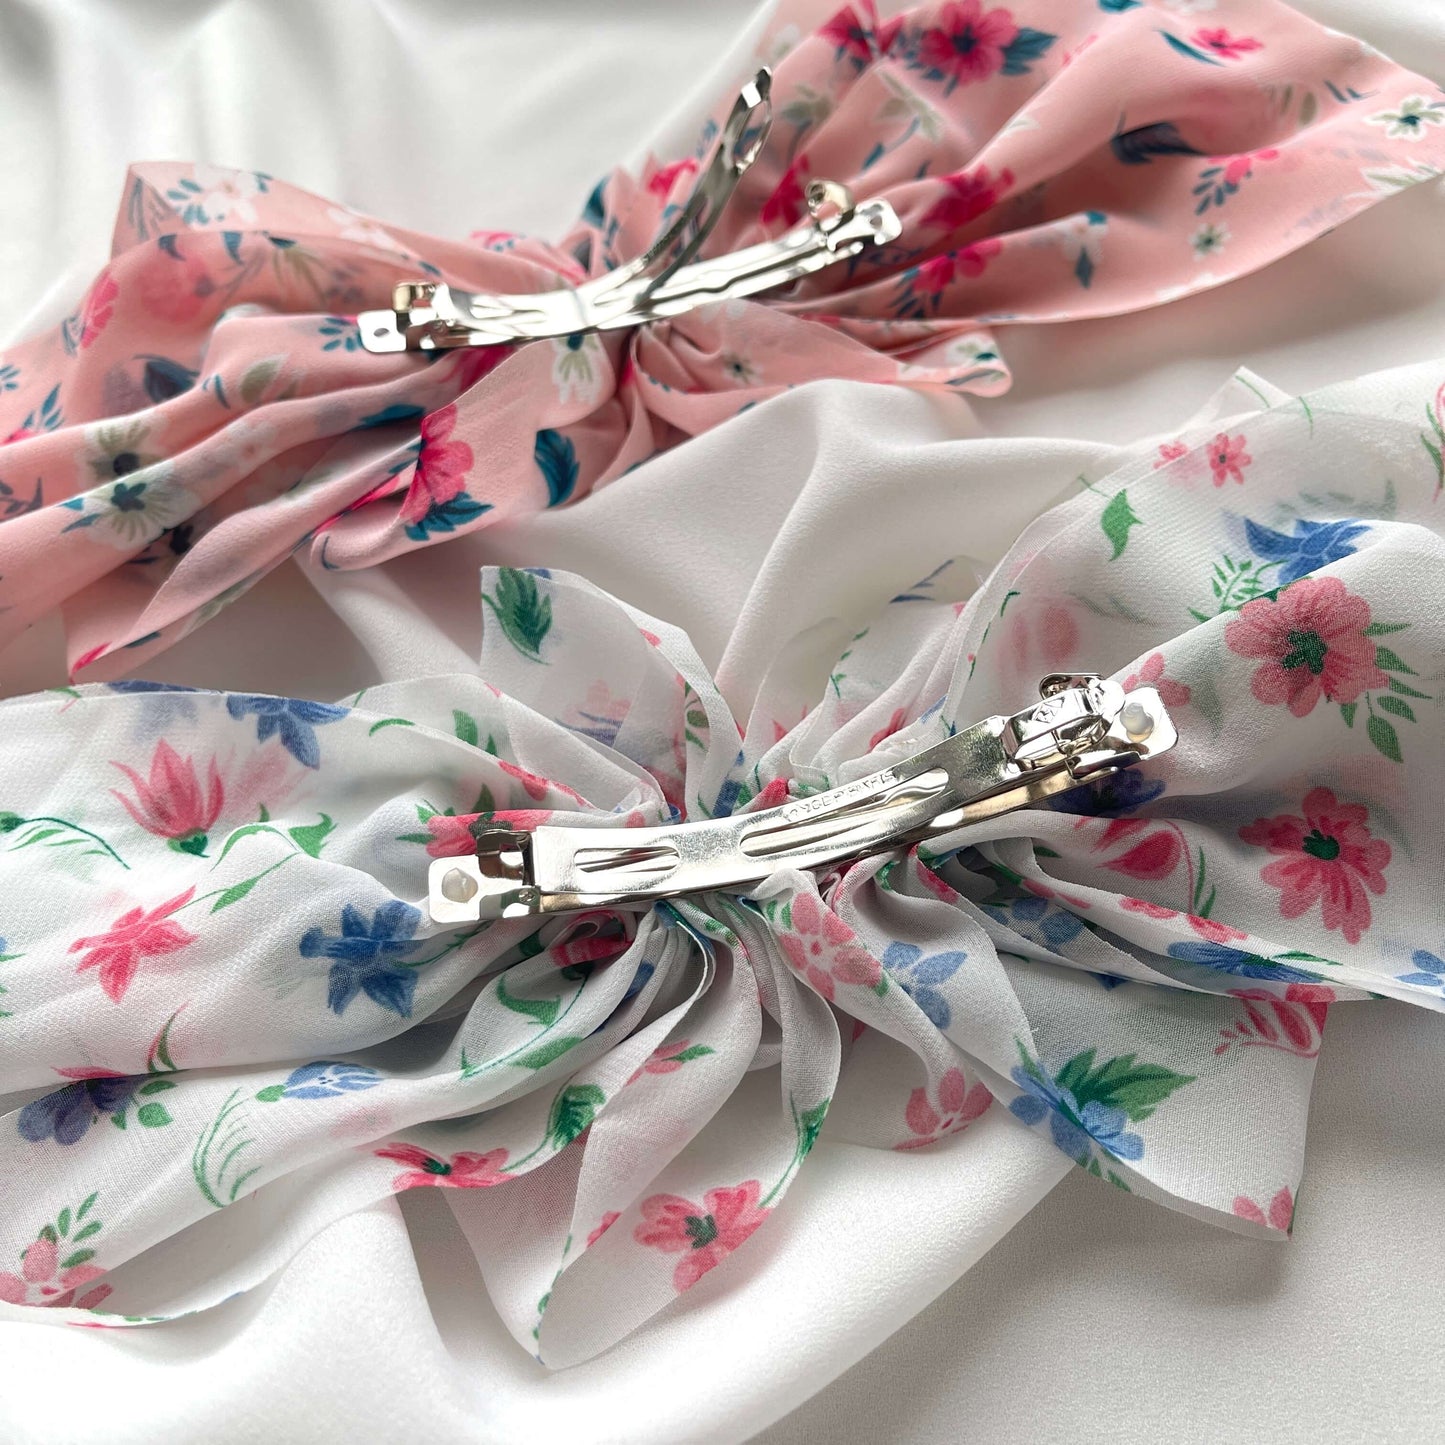 [BF SALE] 1 PCS Floral Chiffon Extra Large Multi-Layer Hair Bow